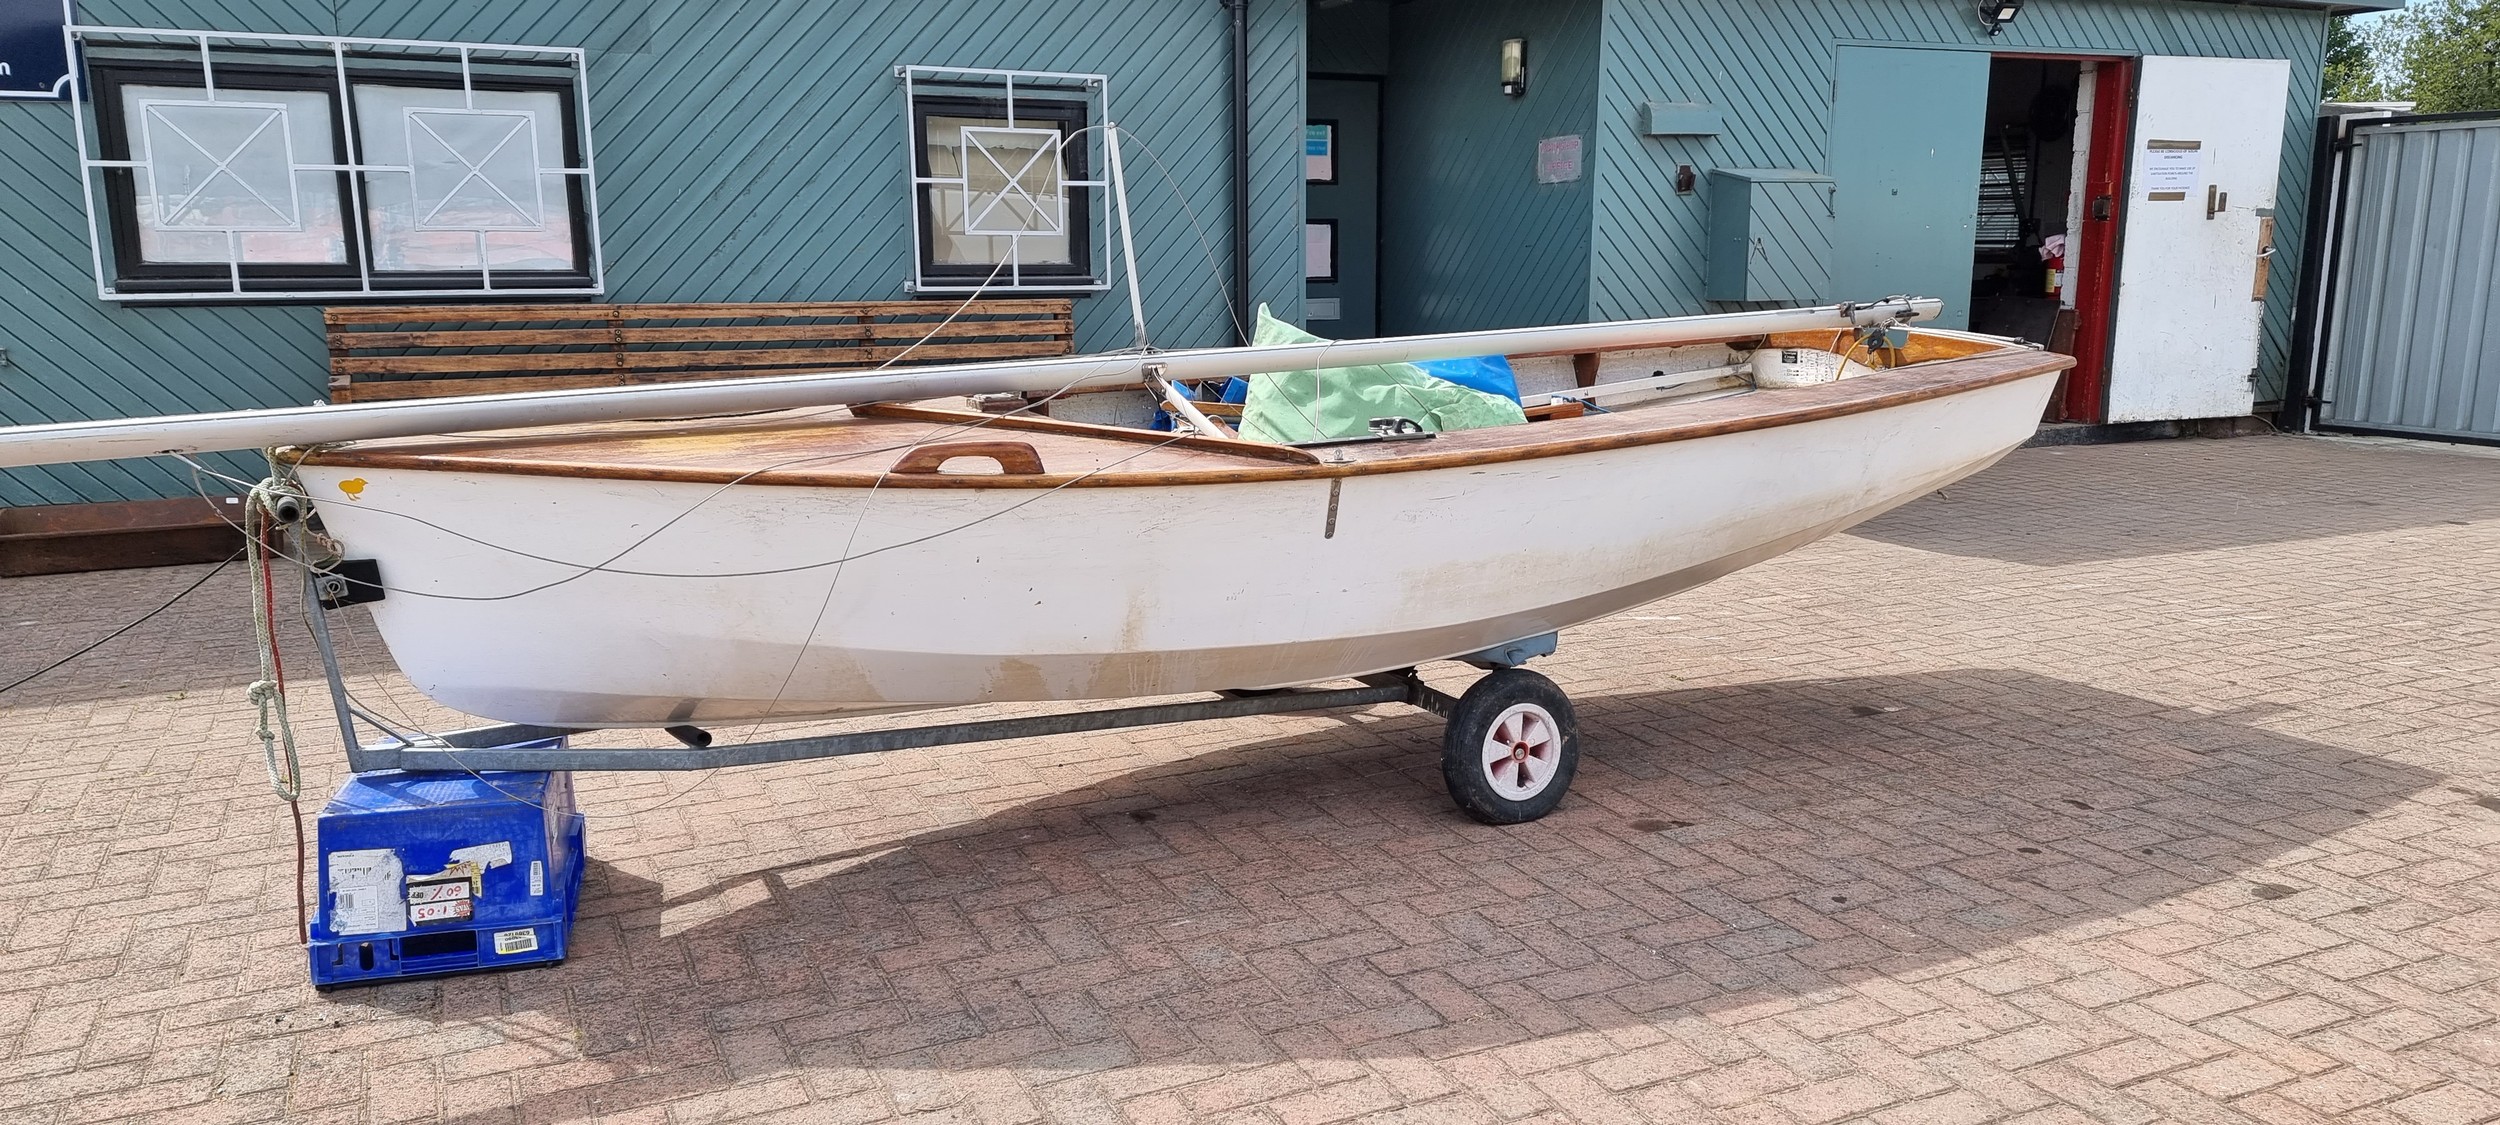 An Enterprise sailing dinghy, serial number 310, mould 10, sail number K16581, 4 meter/two person, - Image 2 of 16